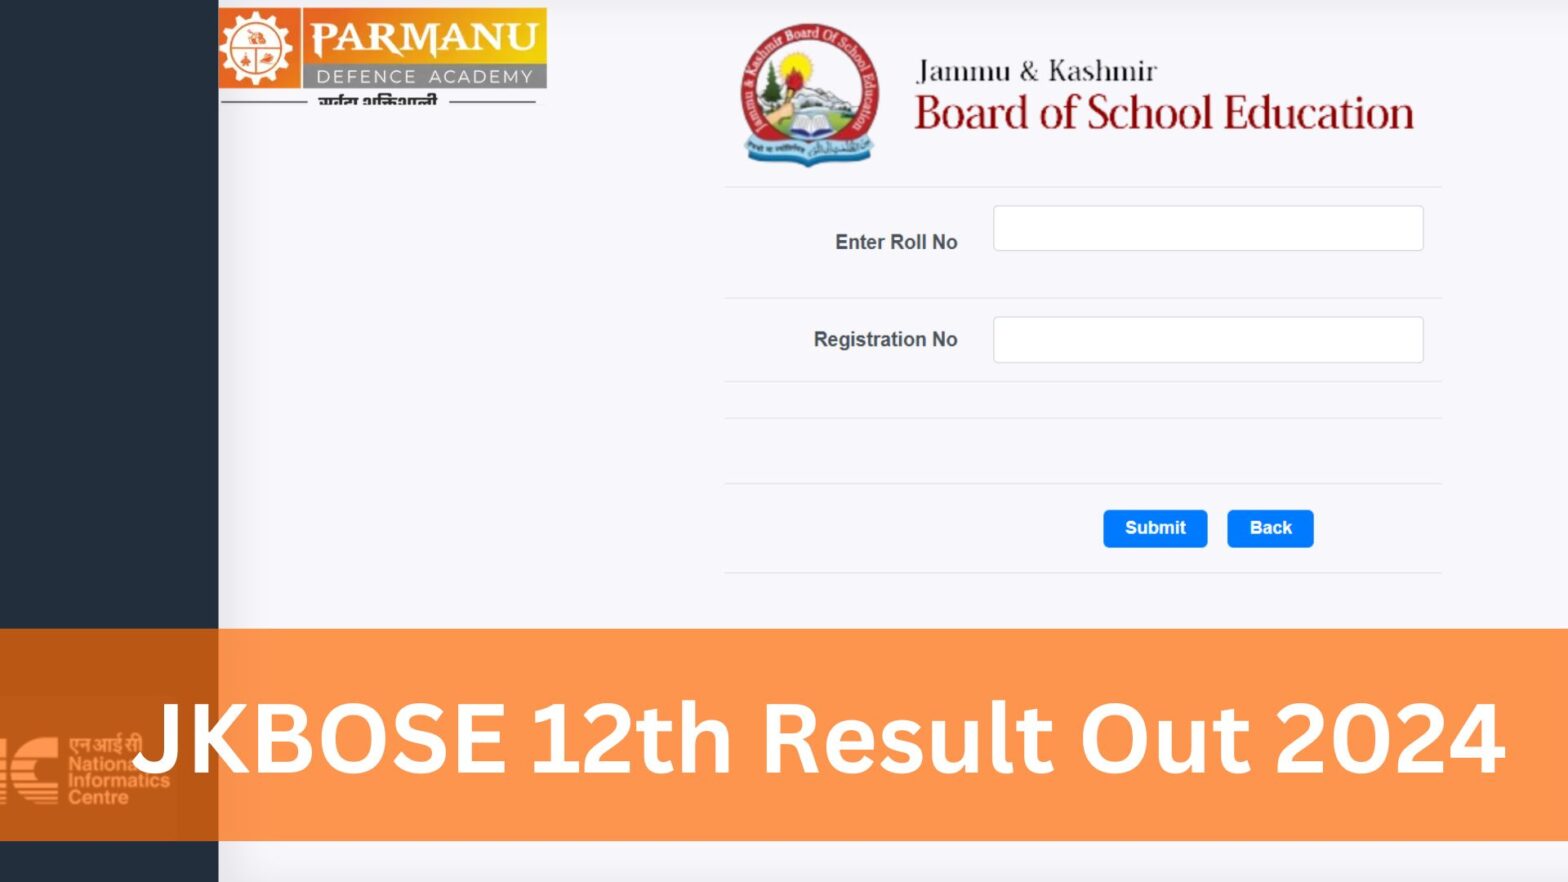 JKBOSE 12th Result Out 2024